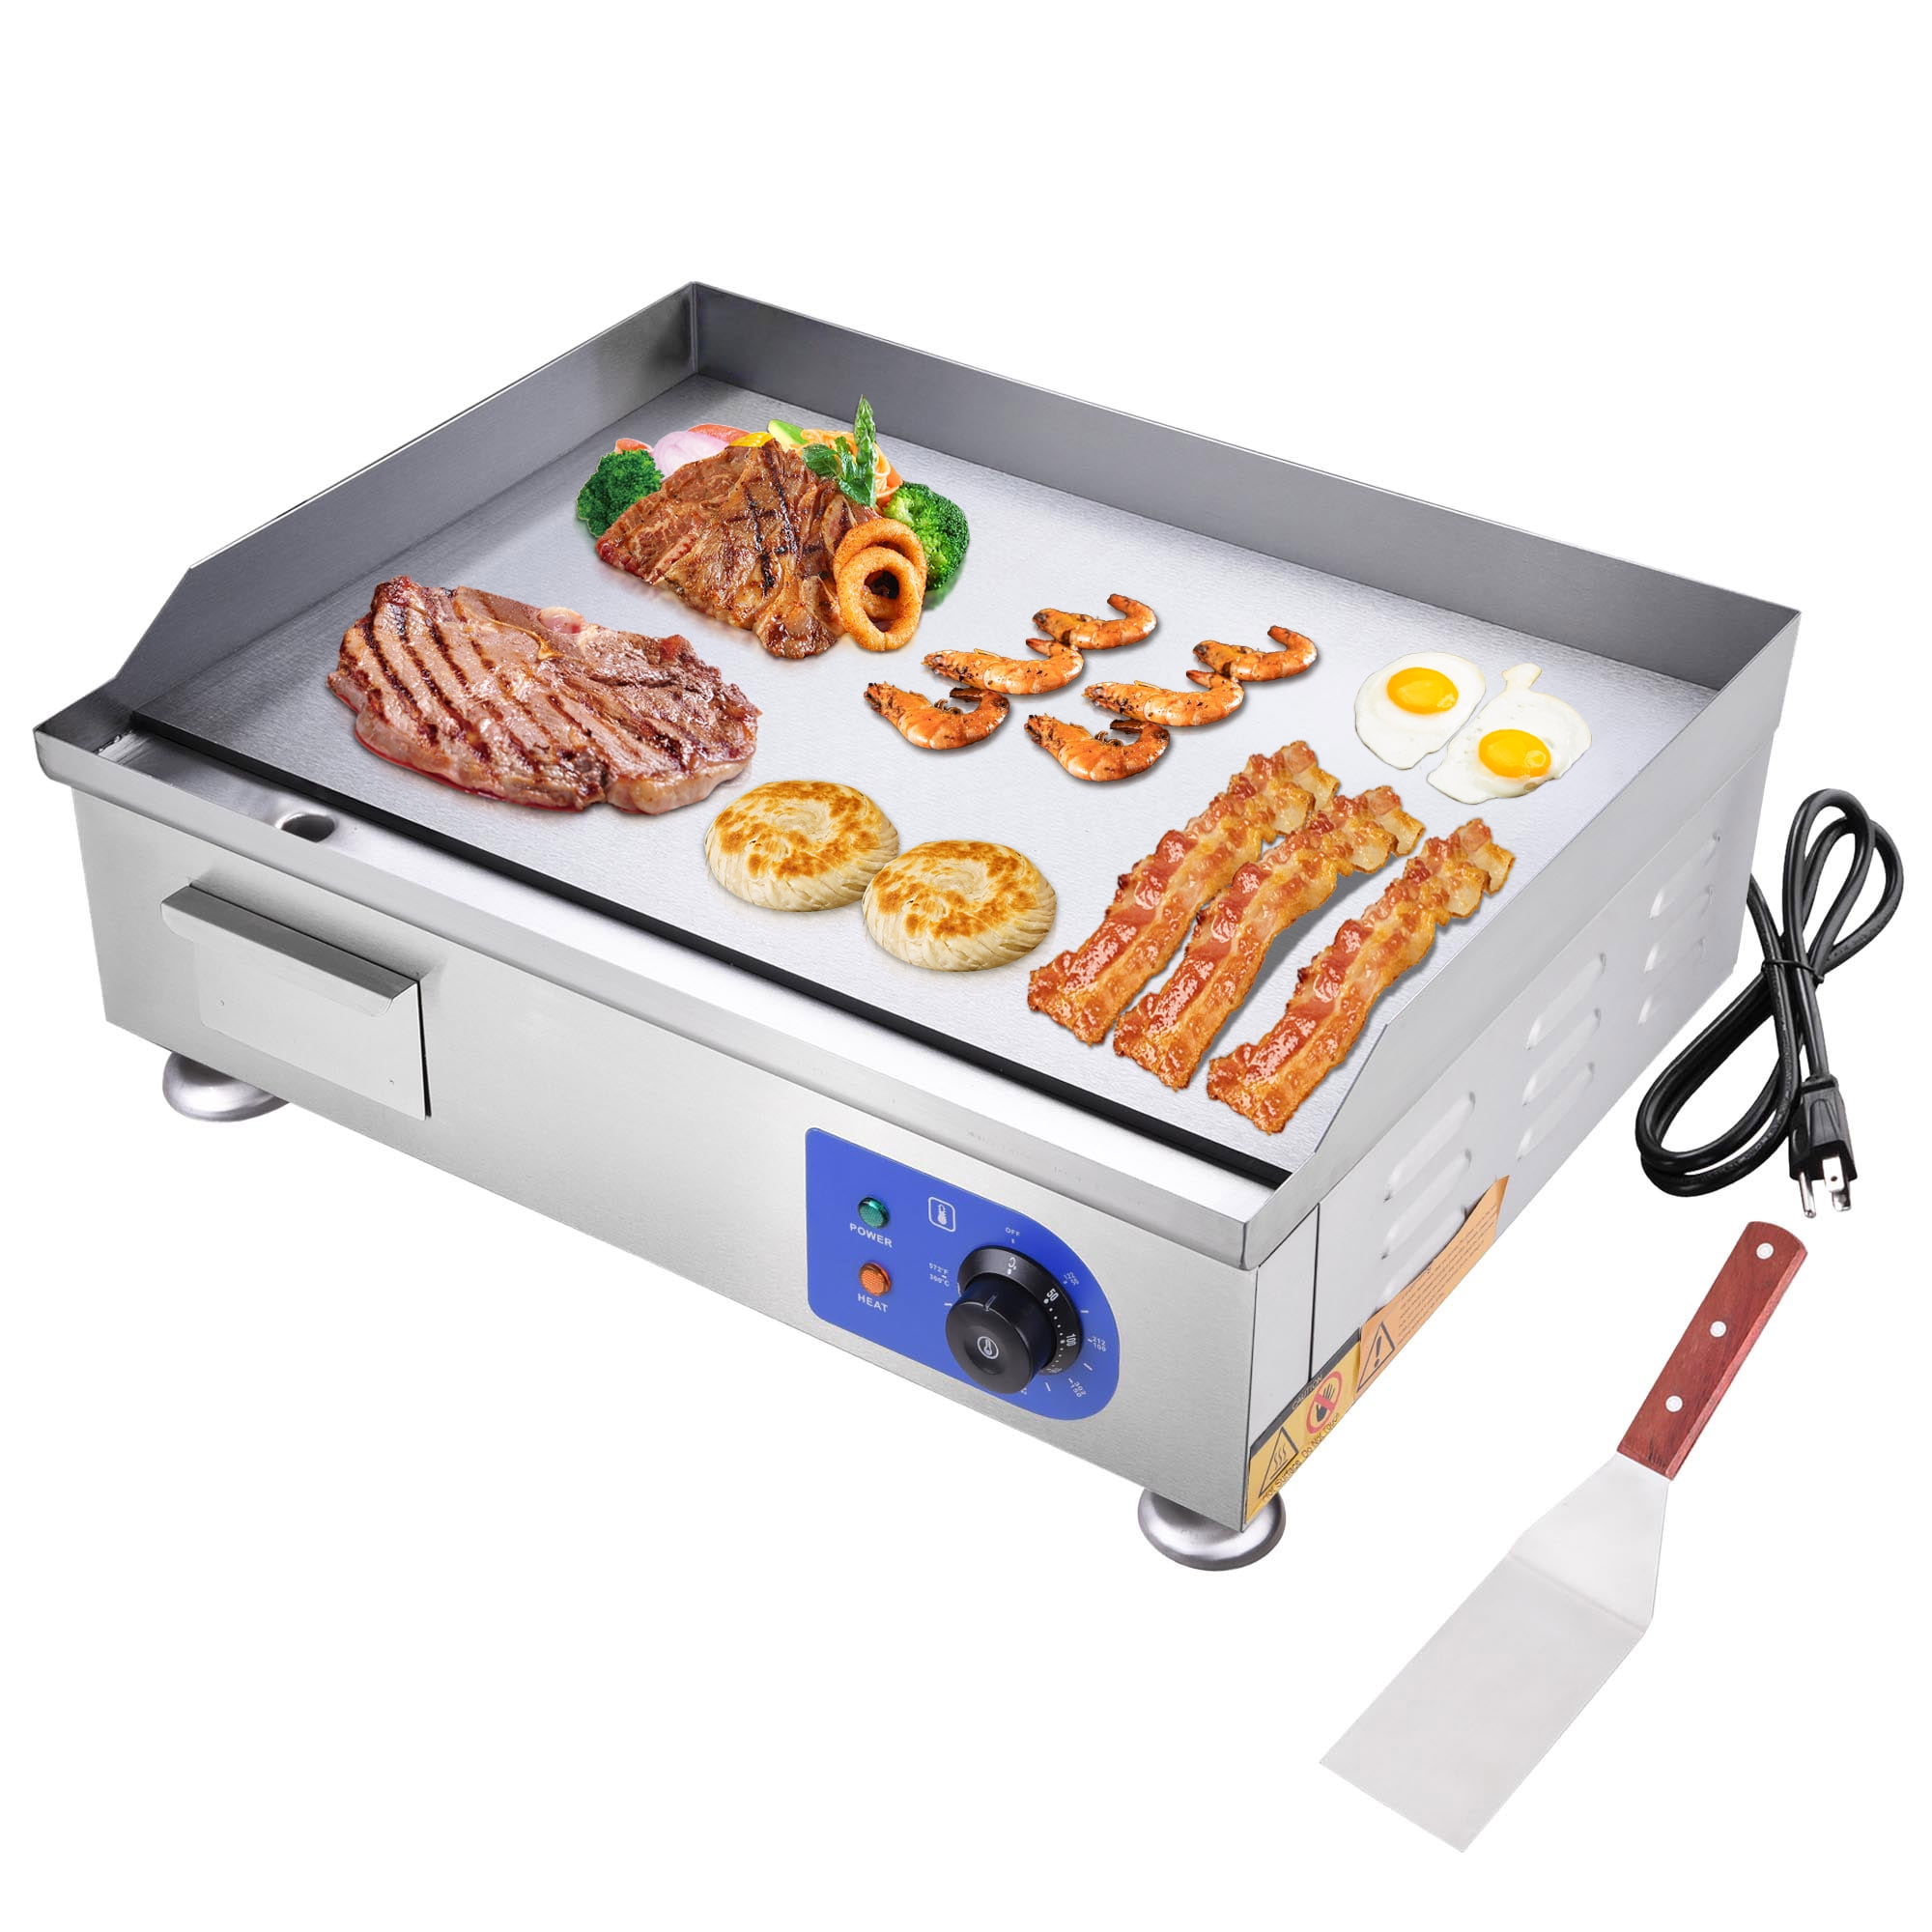 NAKS 30" UL Electric Countertop Griddle 